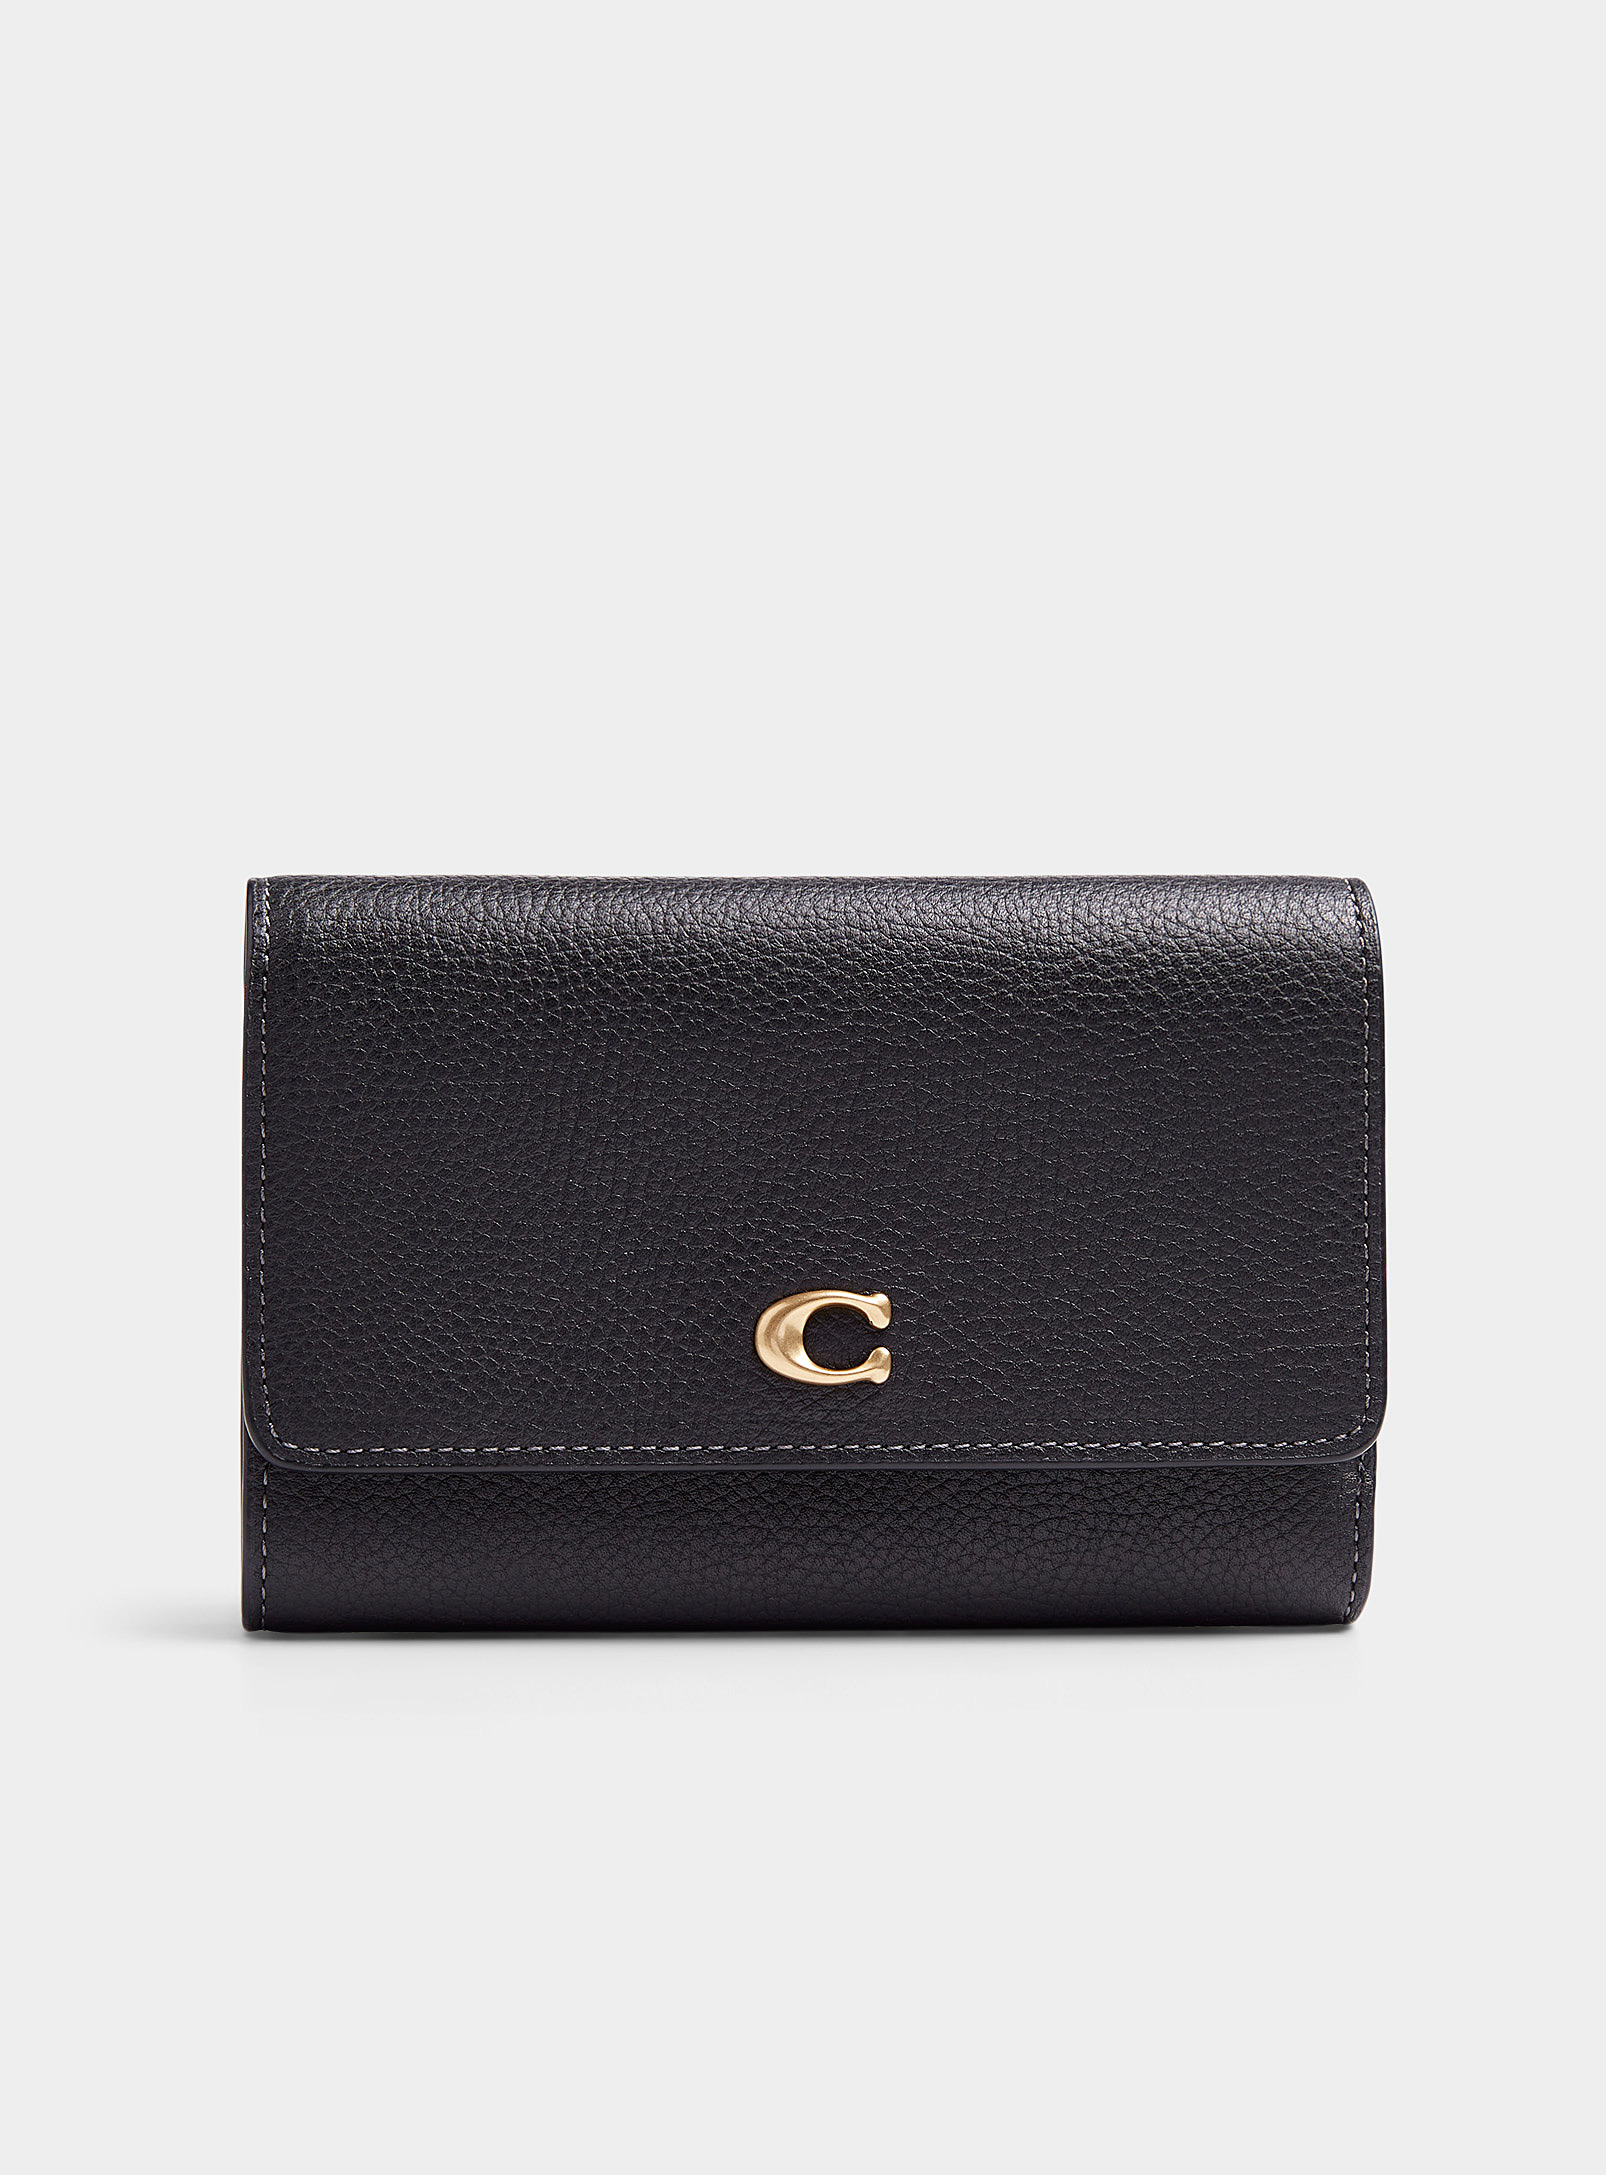 Coach Signature Leather Flap Wallet In Black